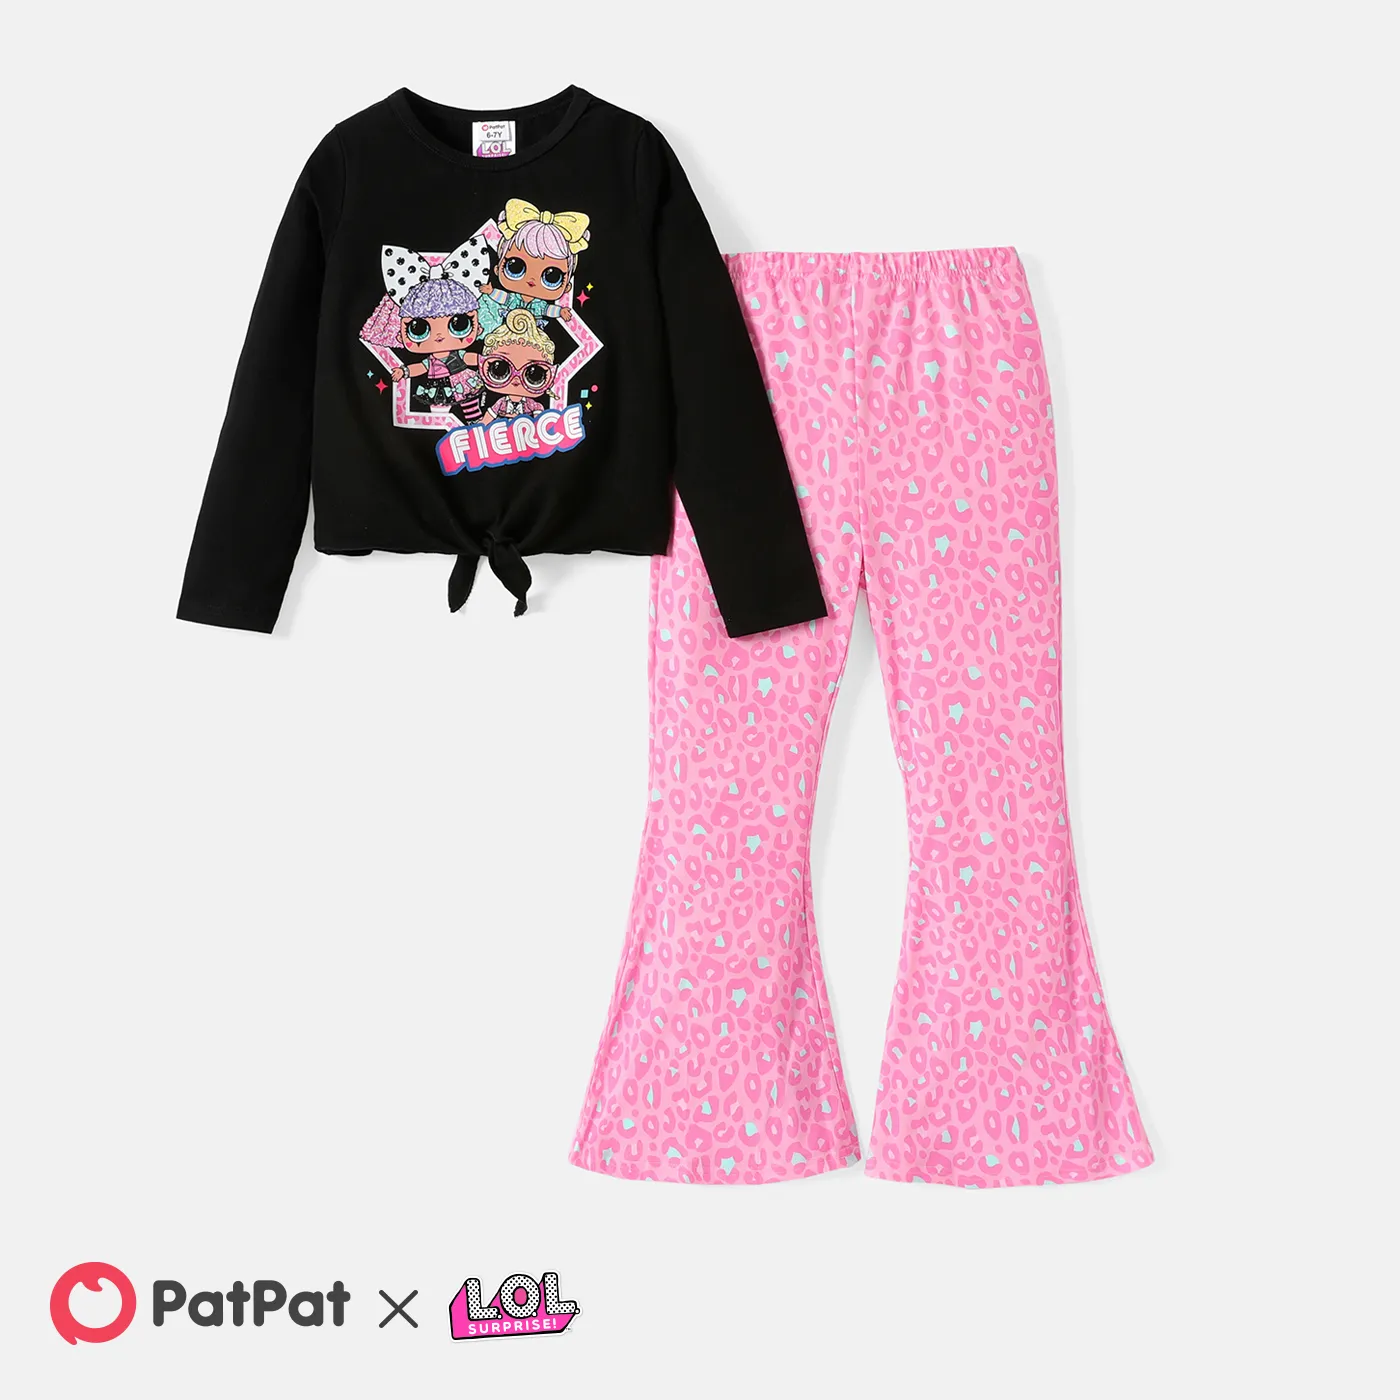 

L.O.L. SURPRISE! 2pcs Kid Girl Tie Knot Cotton Long-sleeve Tee and Heart/Leopard Print Flared Pants Set